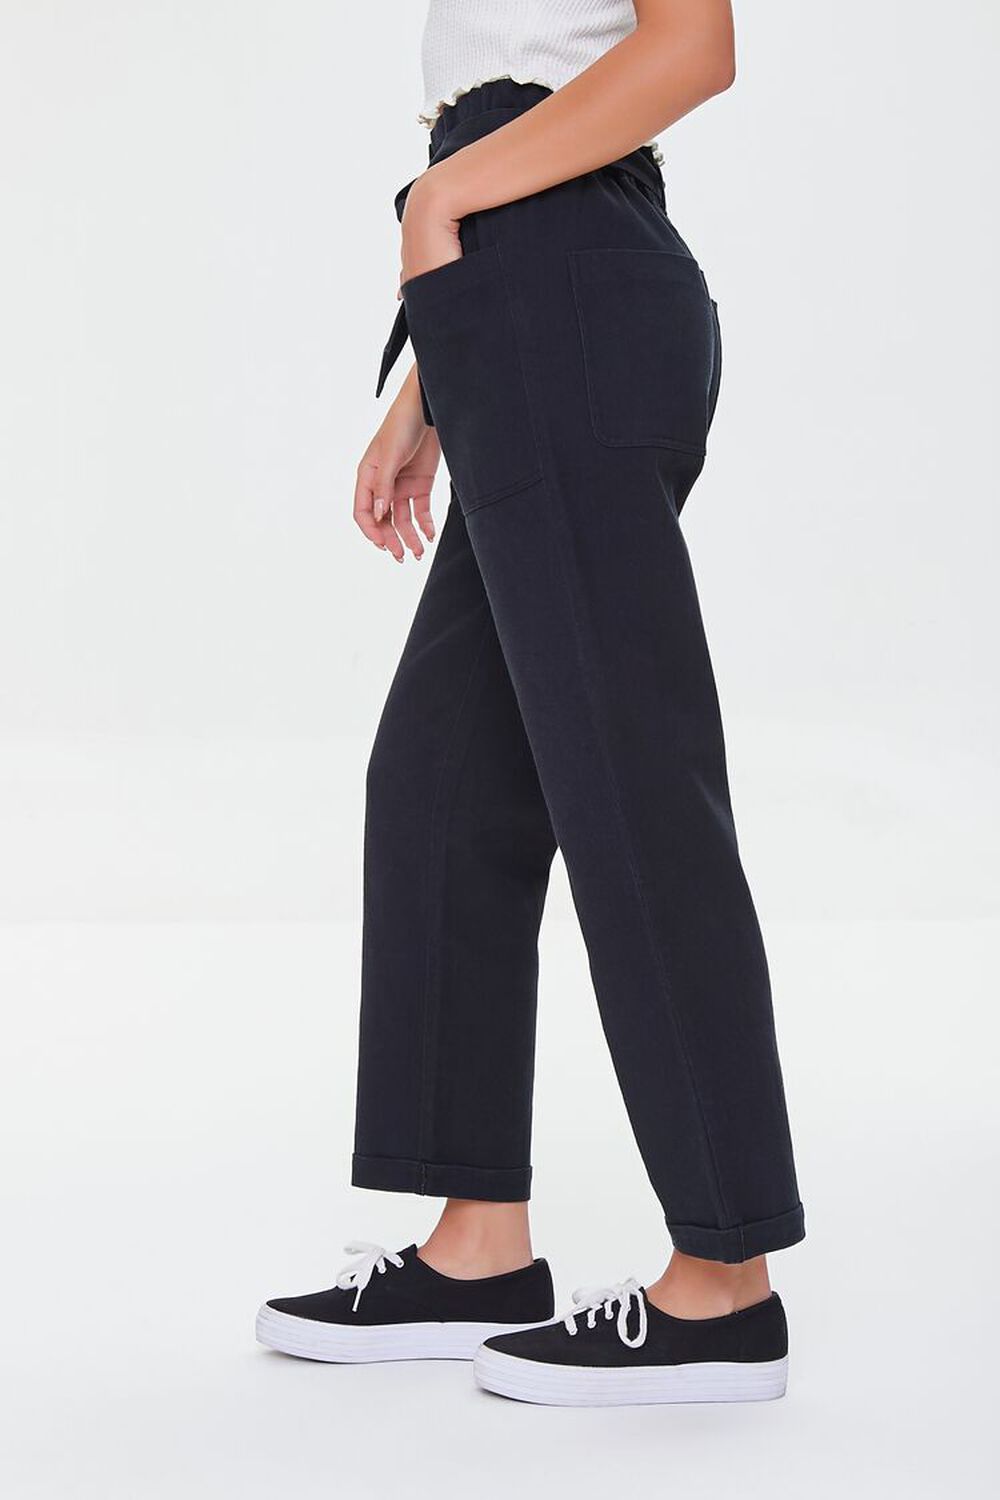 Paperbag Ankle Pants, image 3